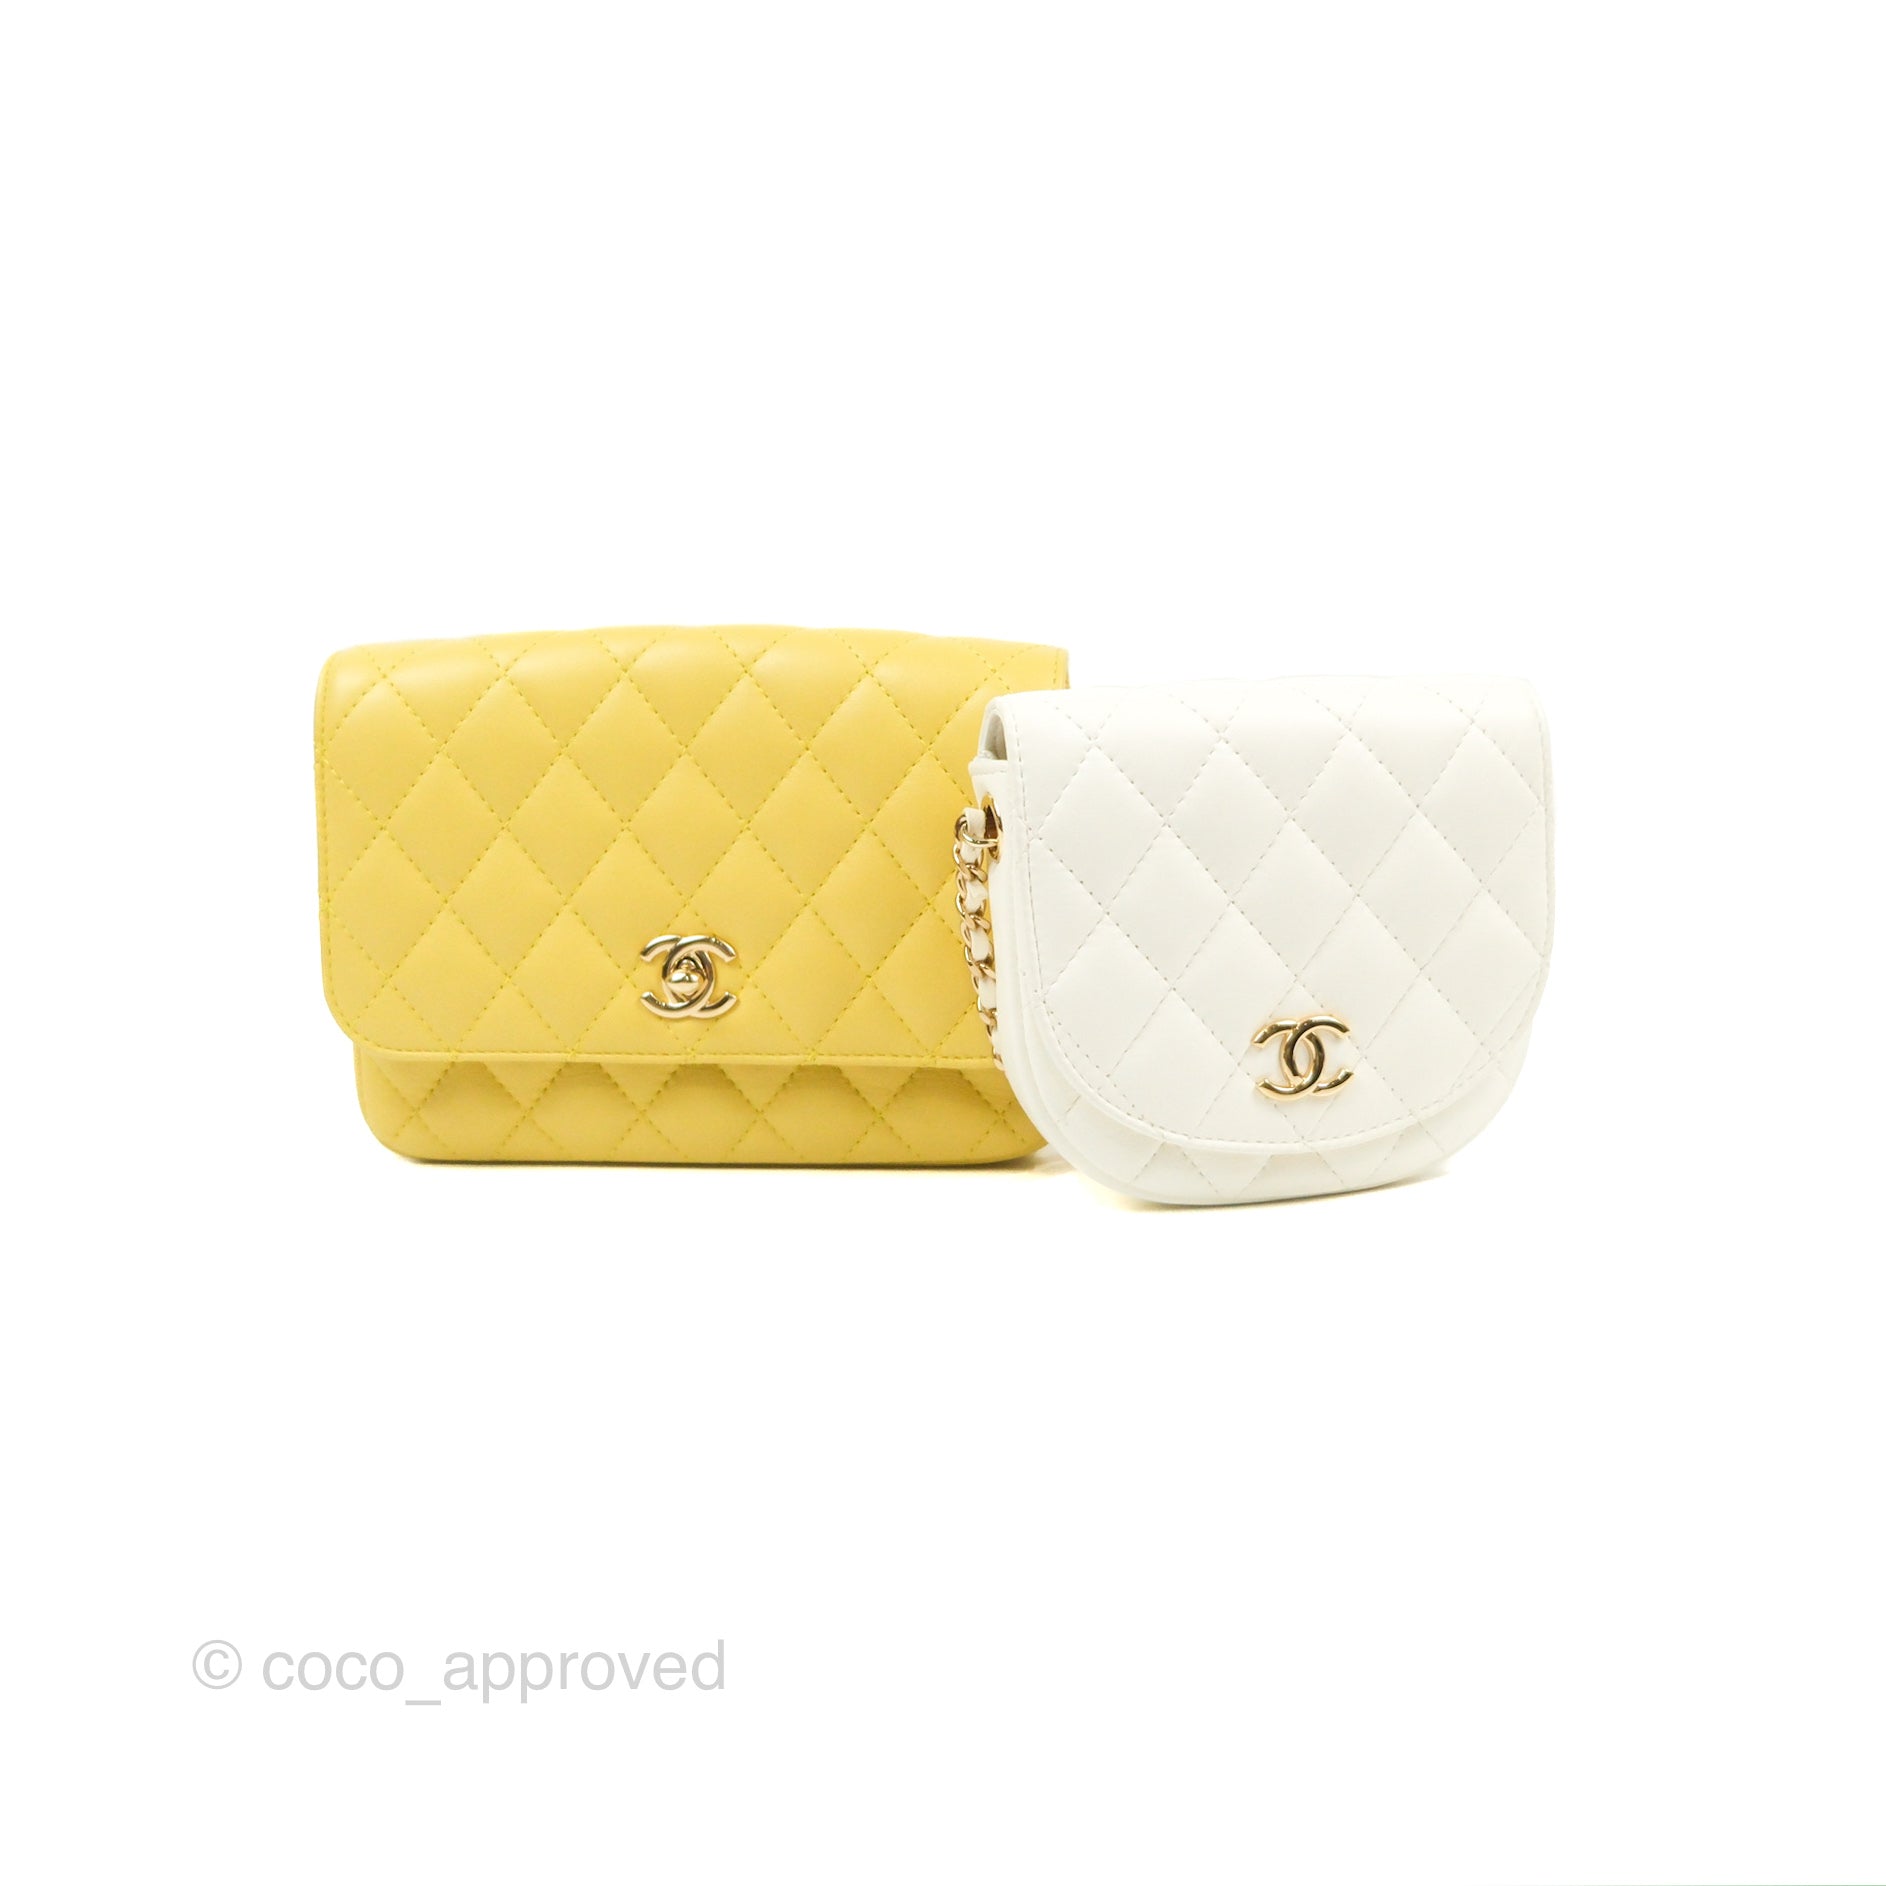 Chanel Side Packs Shoulder Bags Yellow White Lambskin Gold Hardware 19S